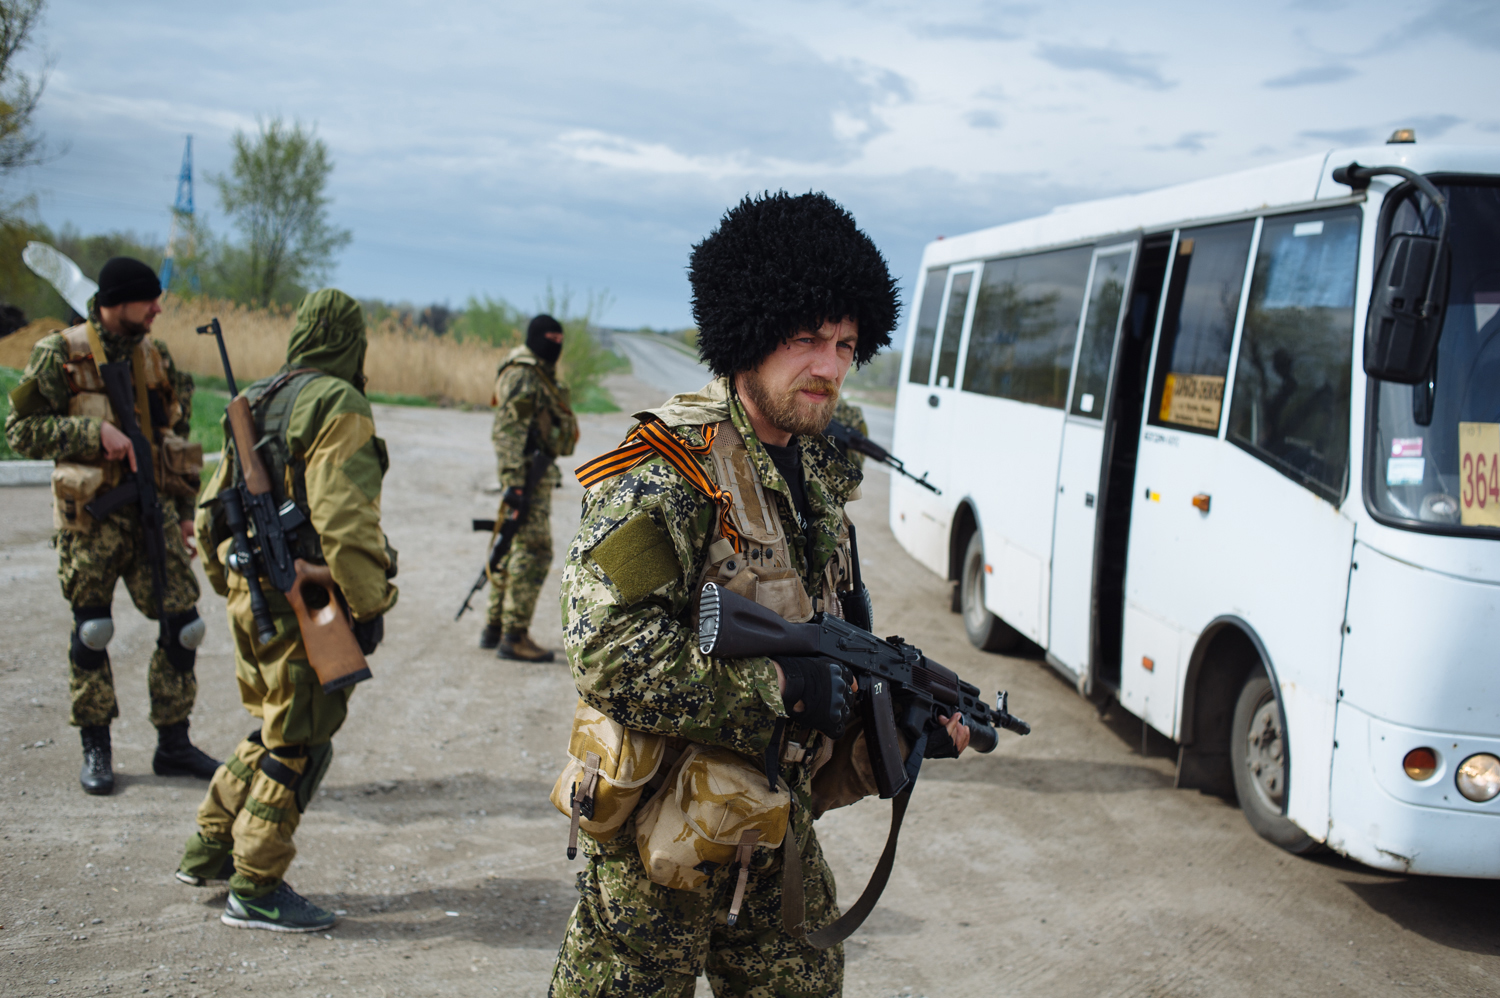 The Russian paramilitary group known as the Wolves' Hundred block the road near the checkpoint on the Kharkiv - Rostov-on-Don highway, April 20, near Slavyansk.